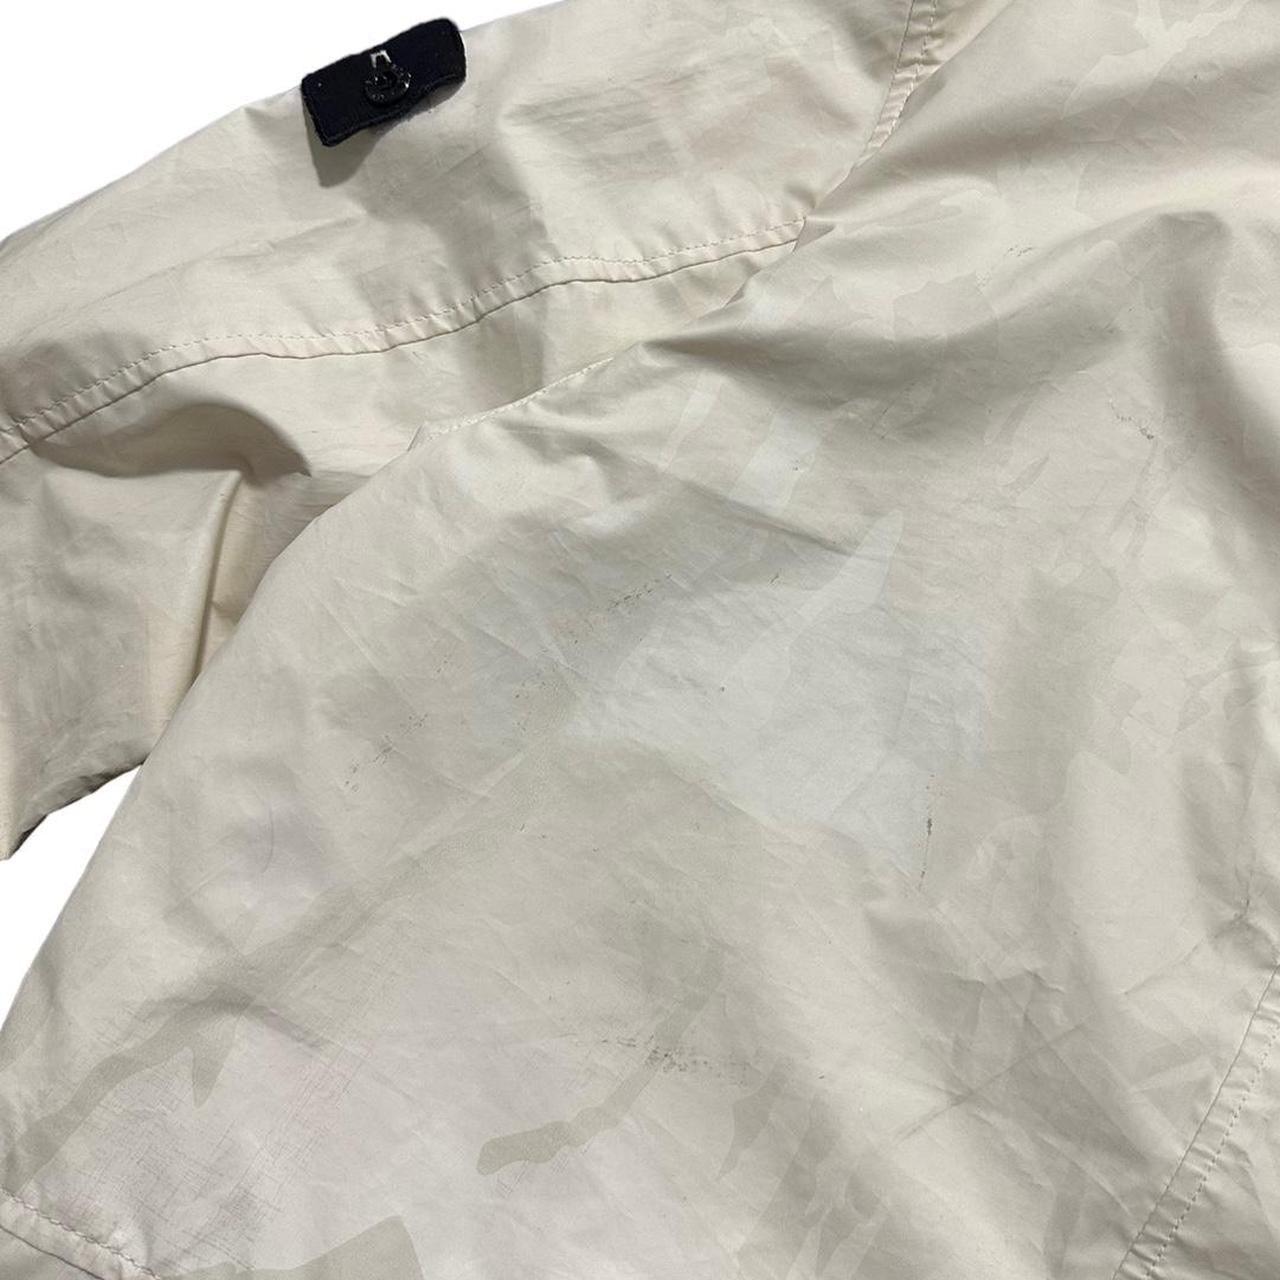 Stone Island Reflective Flowing Camo Jacket - Known Source